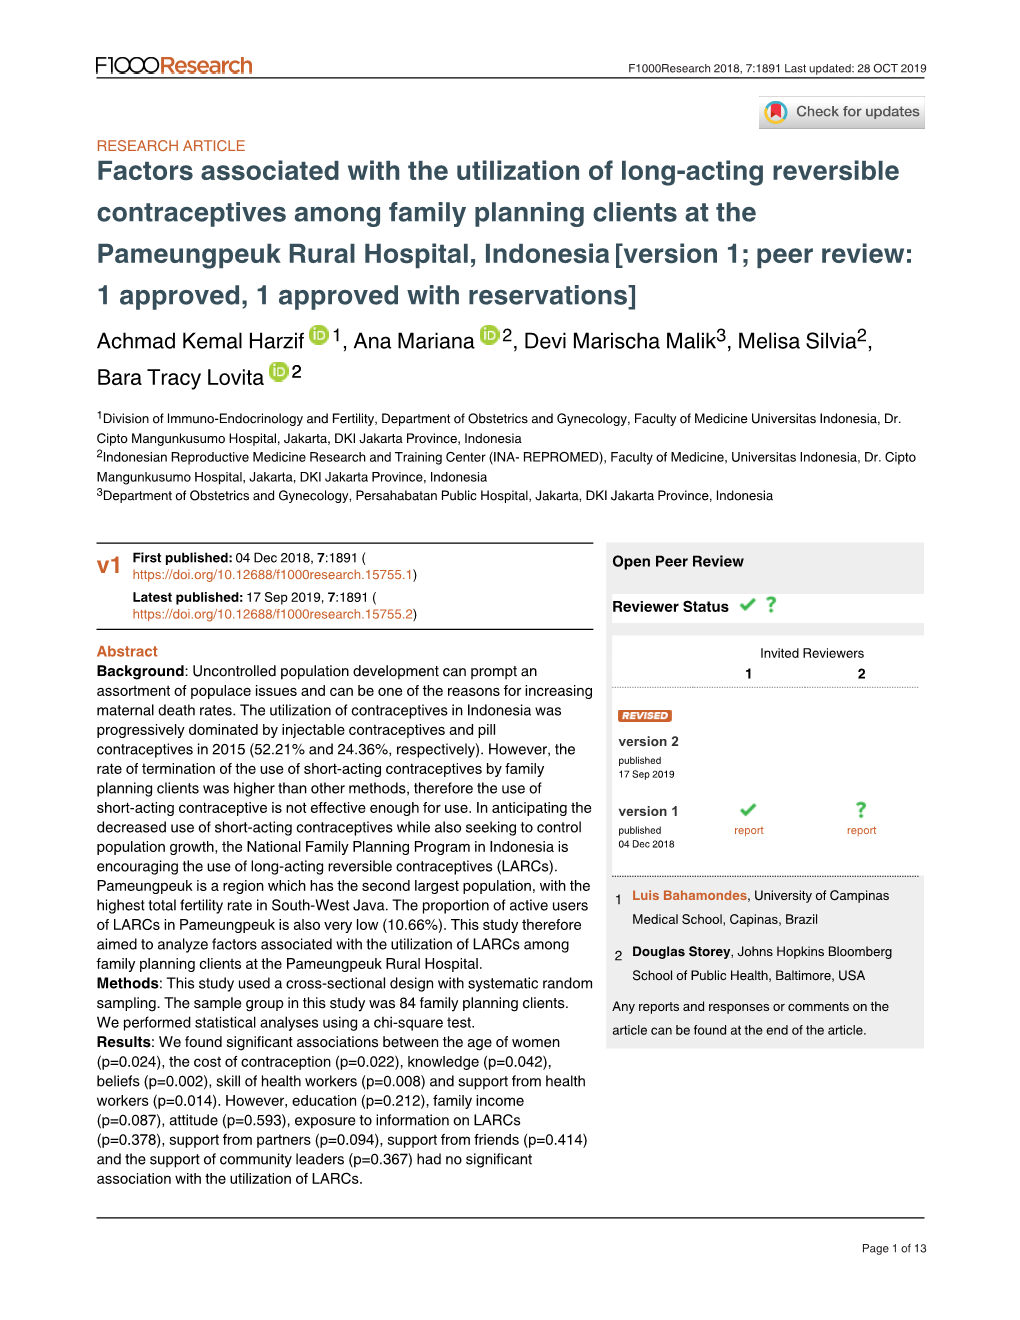 Factors Associated with the Utilization of Long-Acting Reversible Contraceptives Among Family Planning Clients at The